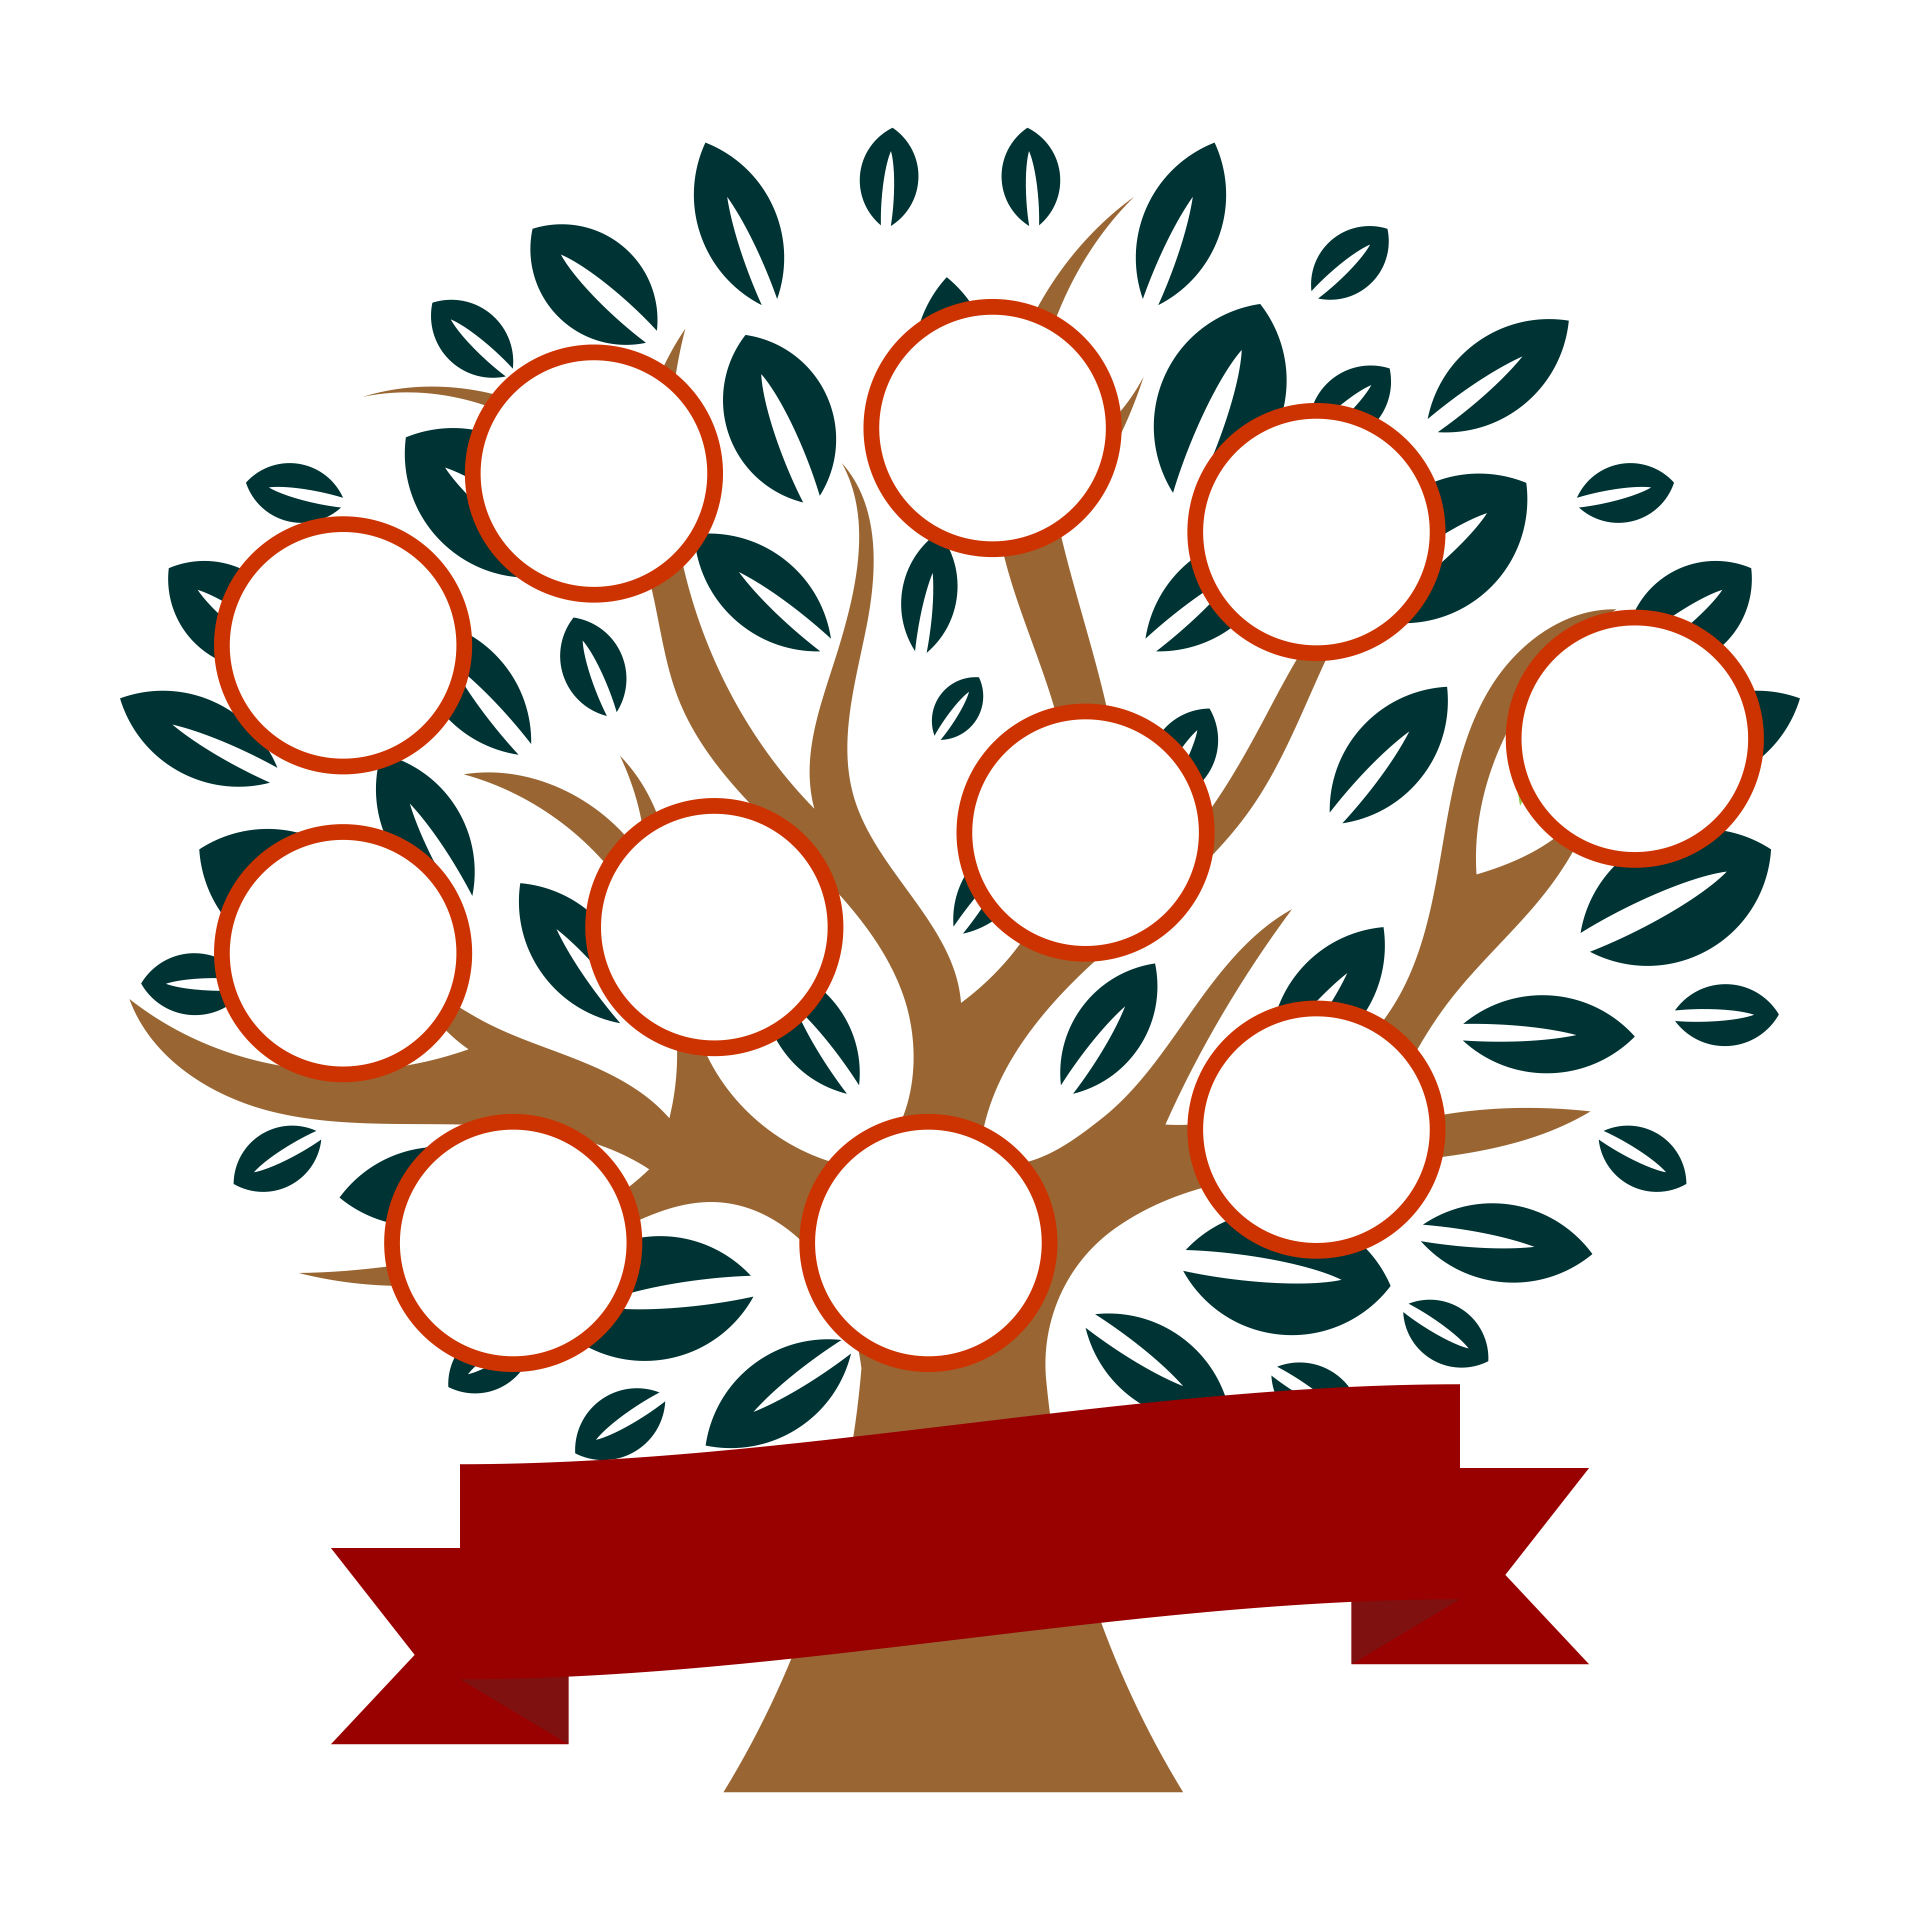 Family Tree - Family Tree Stock Illustration - Download Image Now